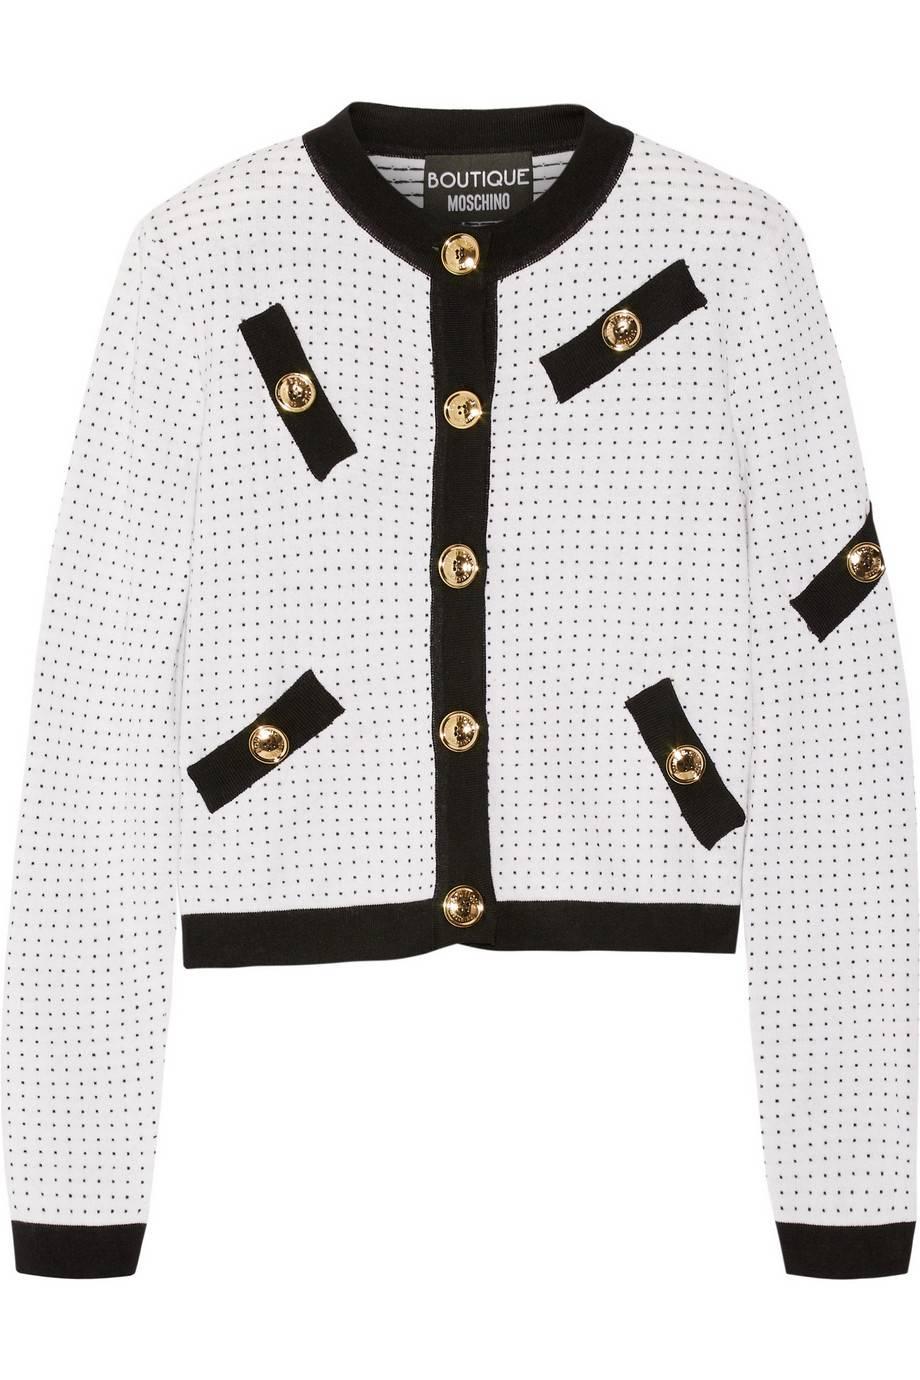 Moschino Boutique Polka Dot Black and White Gold Button Down Cardigan Sweater